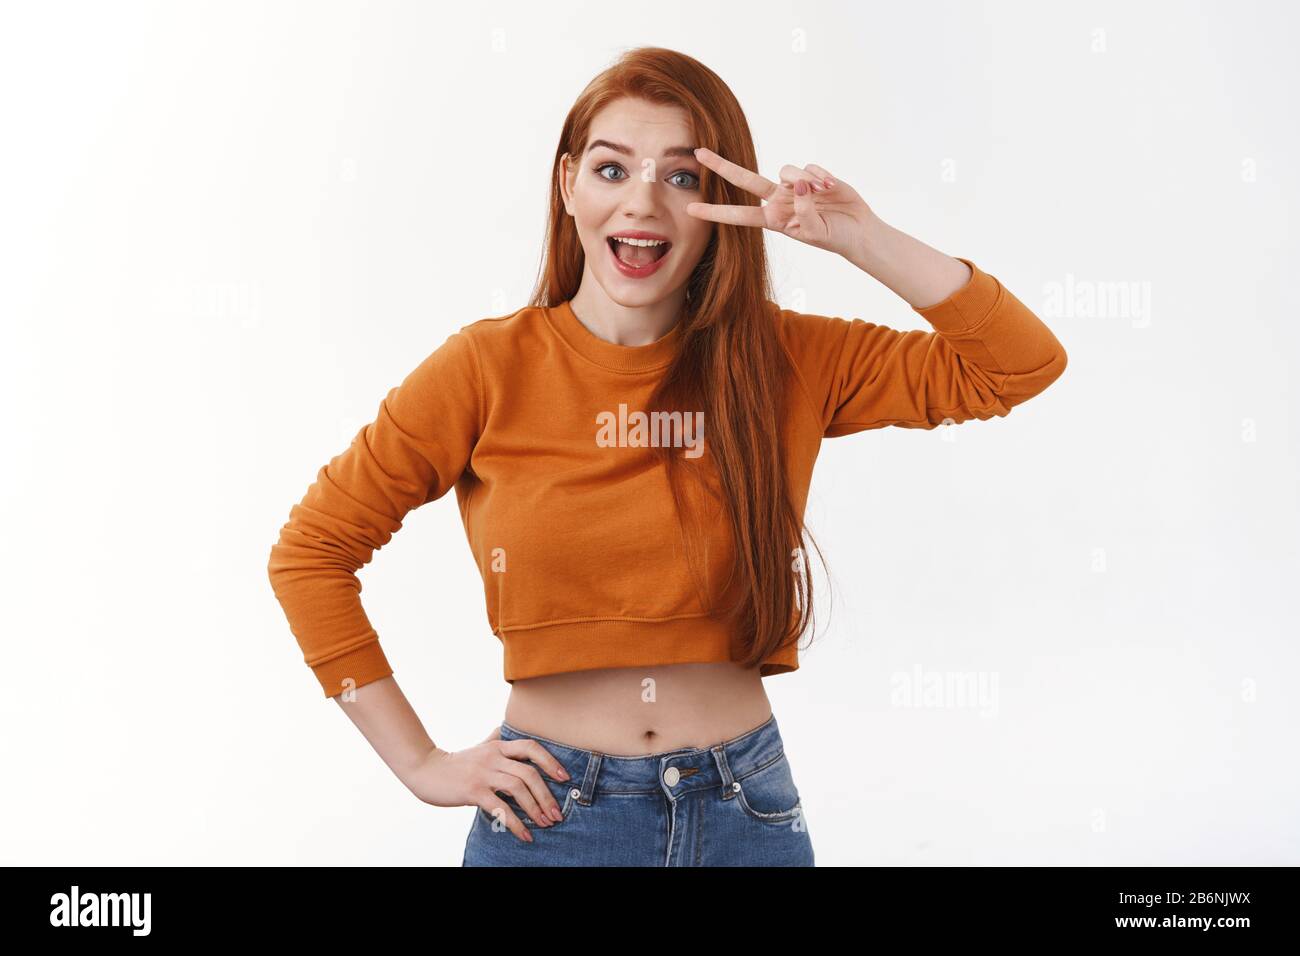 Cute and silly ginger girl in orange cropped top, jeans, hold hand